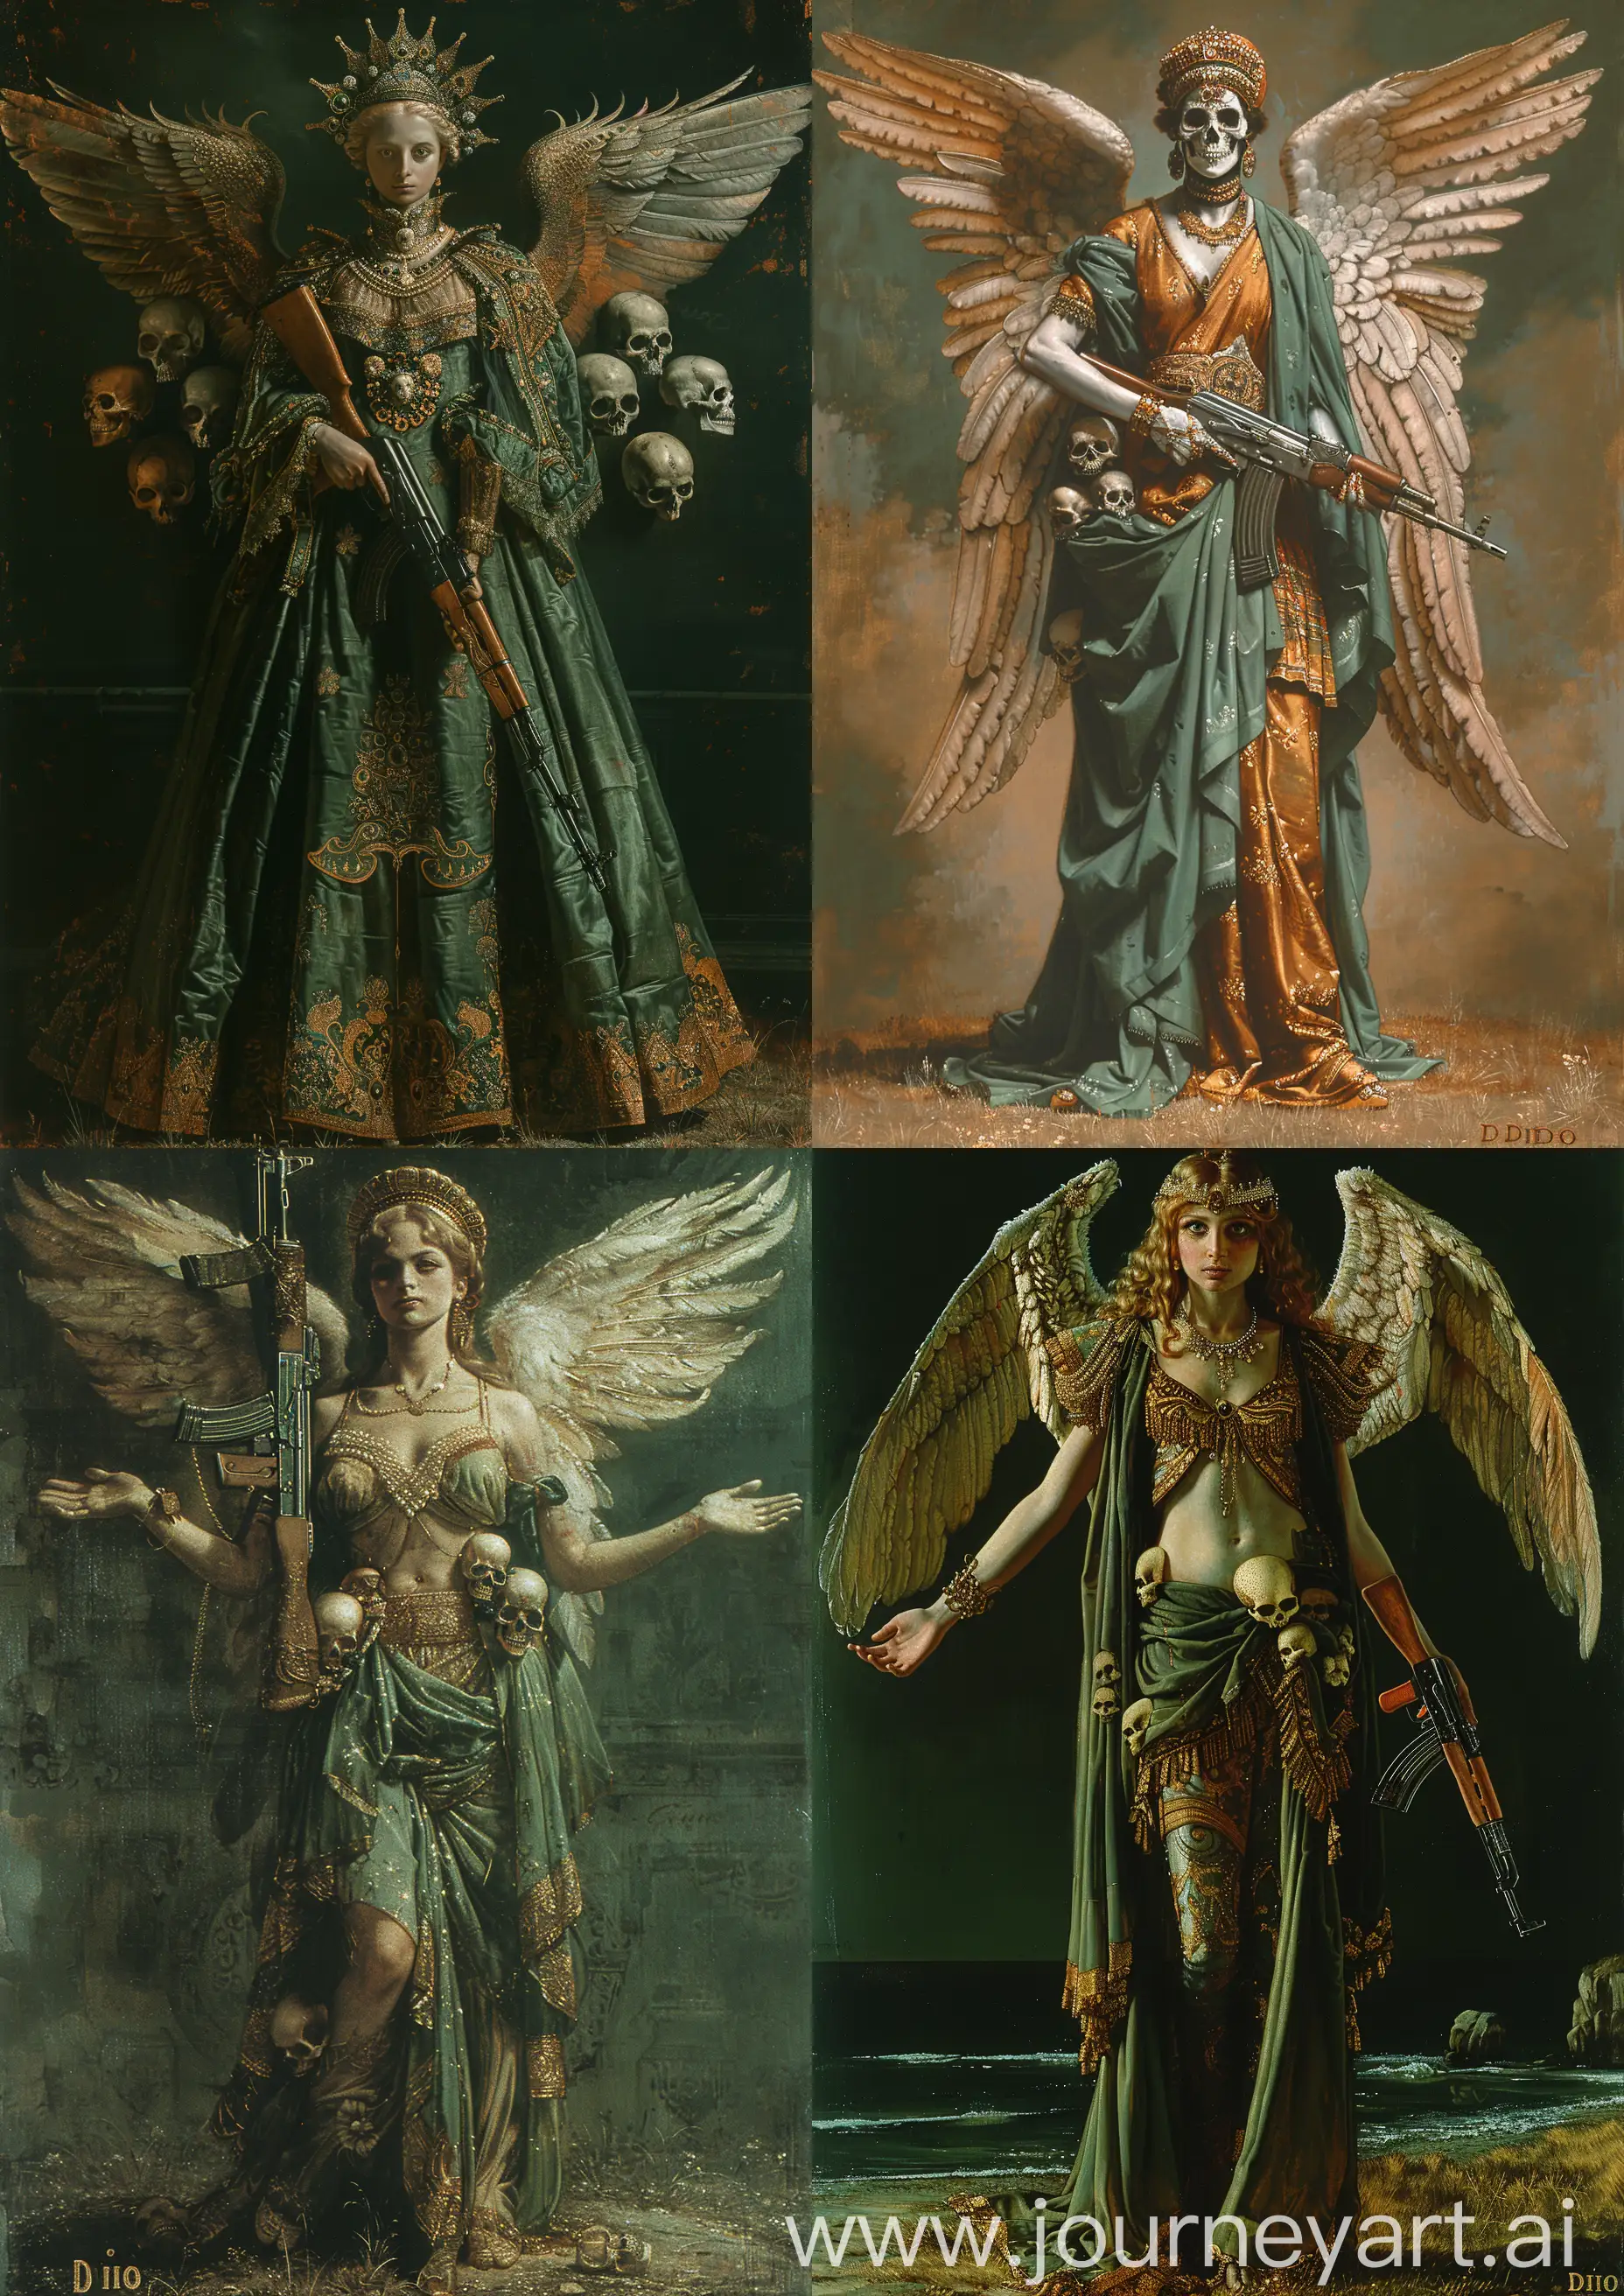 Edward Burne-Jones painting of  the famous queen of carthage "DIDO" having angels wings, in green ornate gold, skulls and silk robes, welding a kalashnikov, standing grass, earth tones, detailed, full body, --c 22 --s 750 --v 6.0 --ar 5:7

